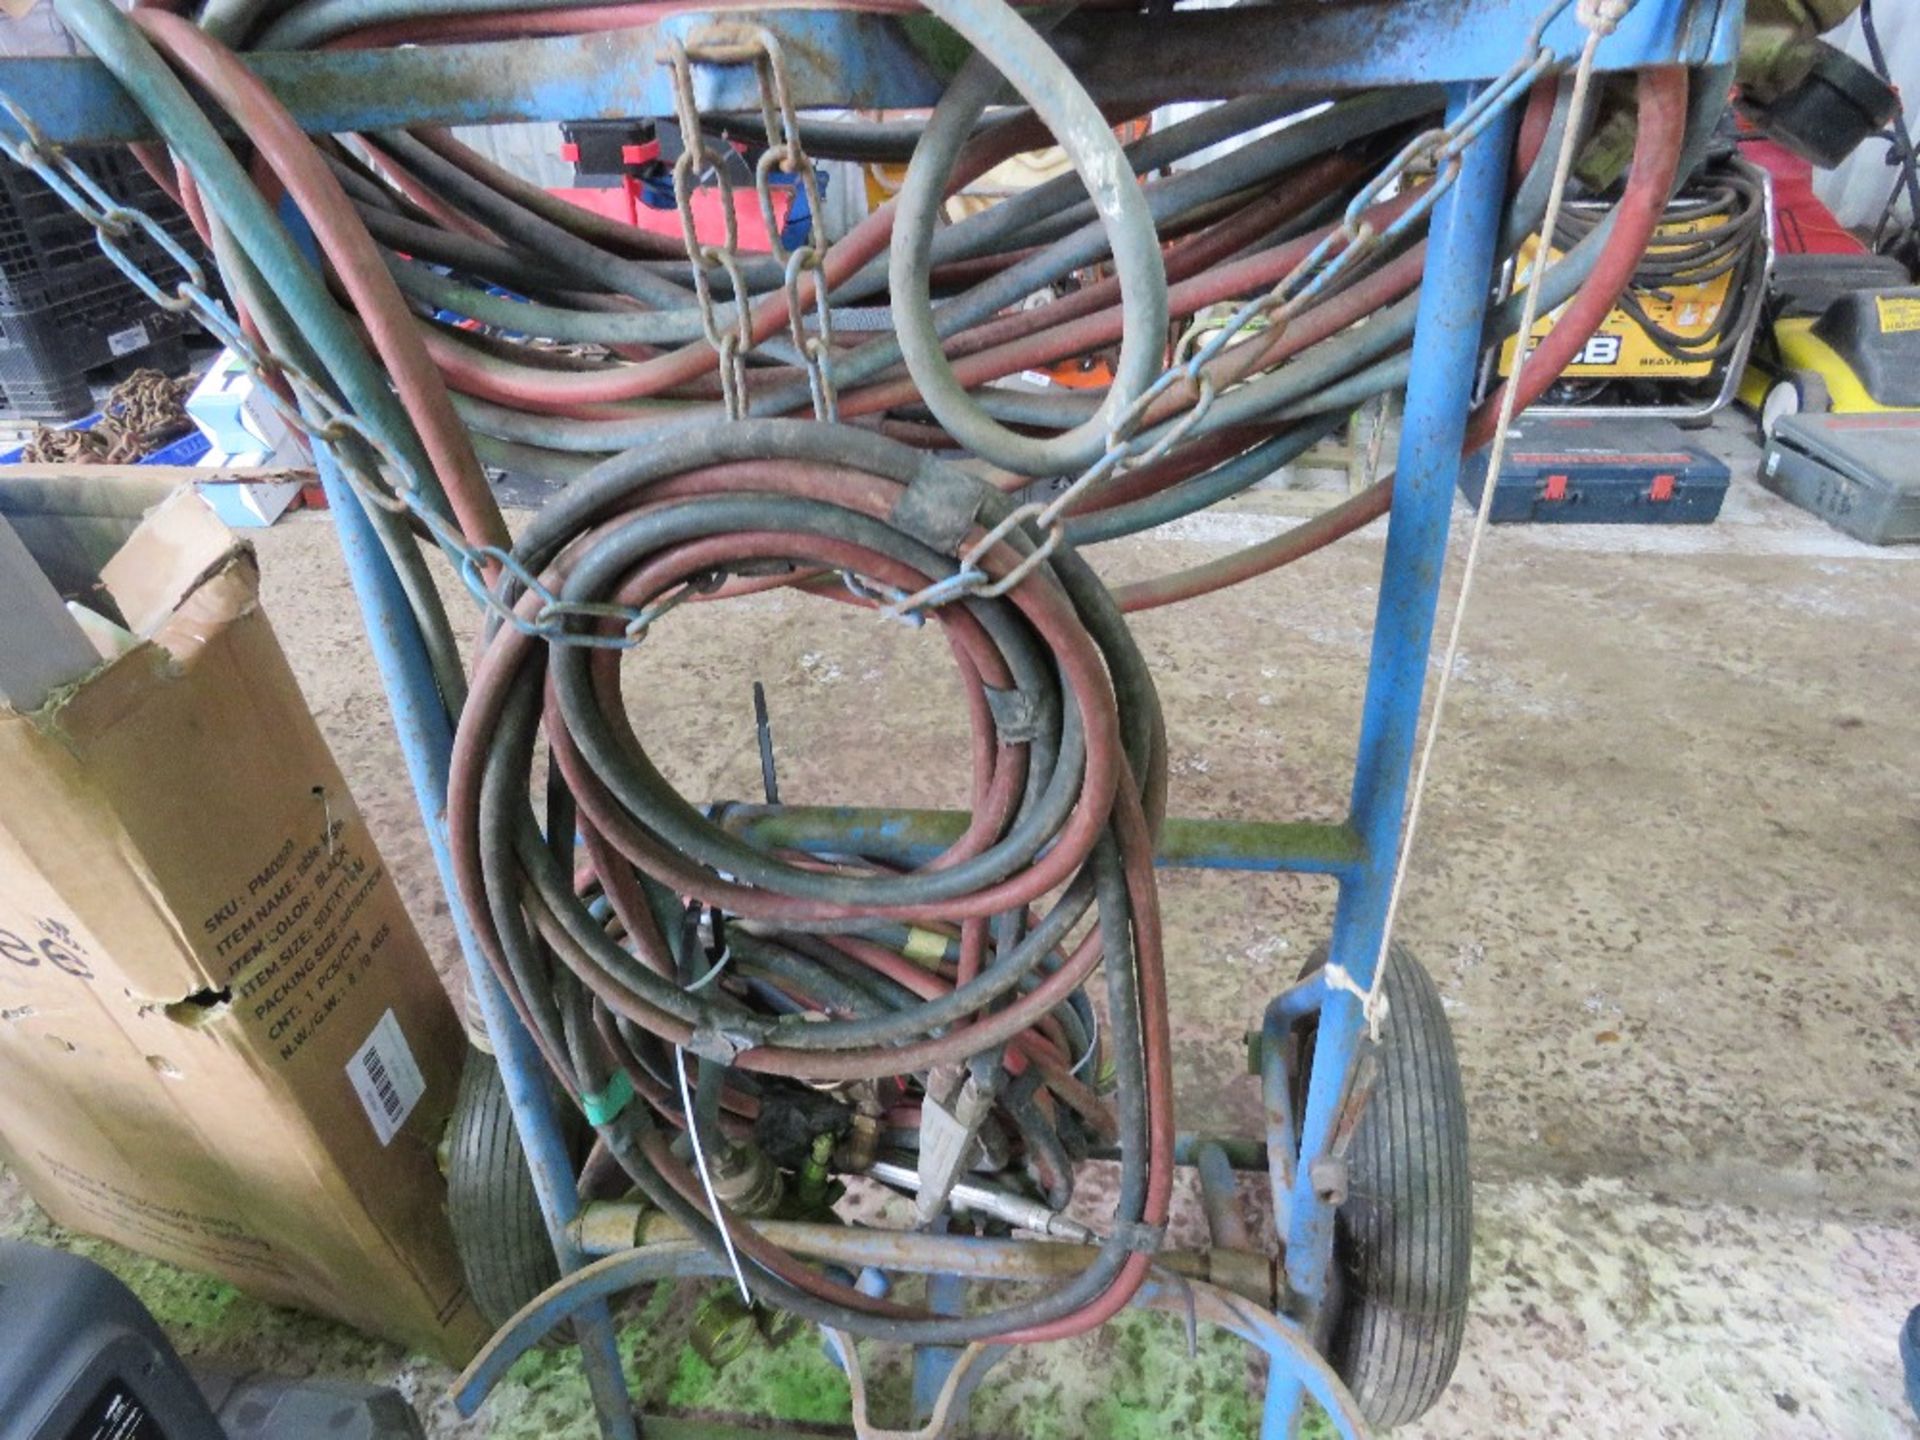 2 X SETS OF OXY-ACETELENE GAS HOSES PLUS A BARROW.....THIS LOT IS SOLD UNDER THE AUCTIONEERS MARGIN - Image 5 of 7